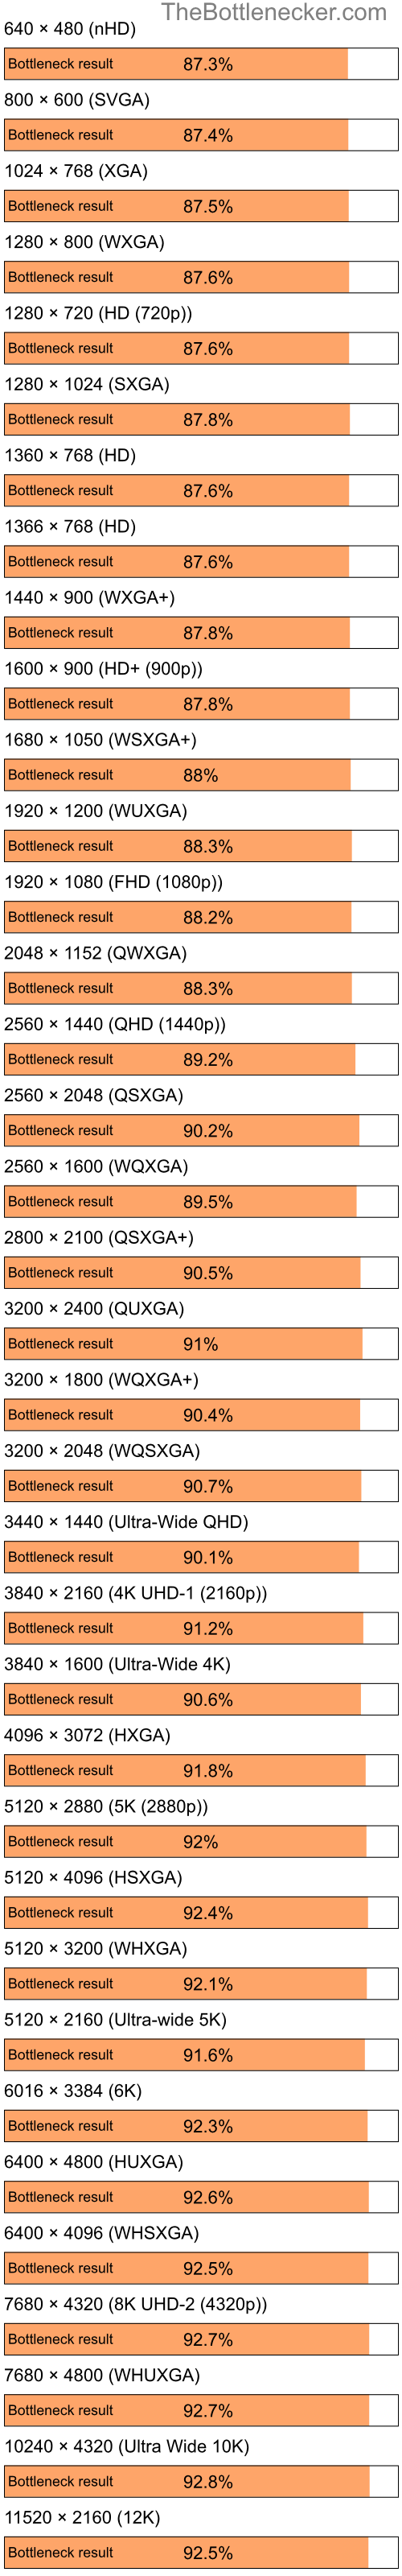 Bottleneck results by resolution for Intel Pentium 4 and NVIDIA GeForce3 Ti 200 in Processor Intense Tasks